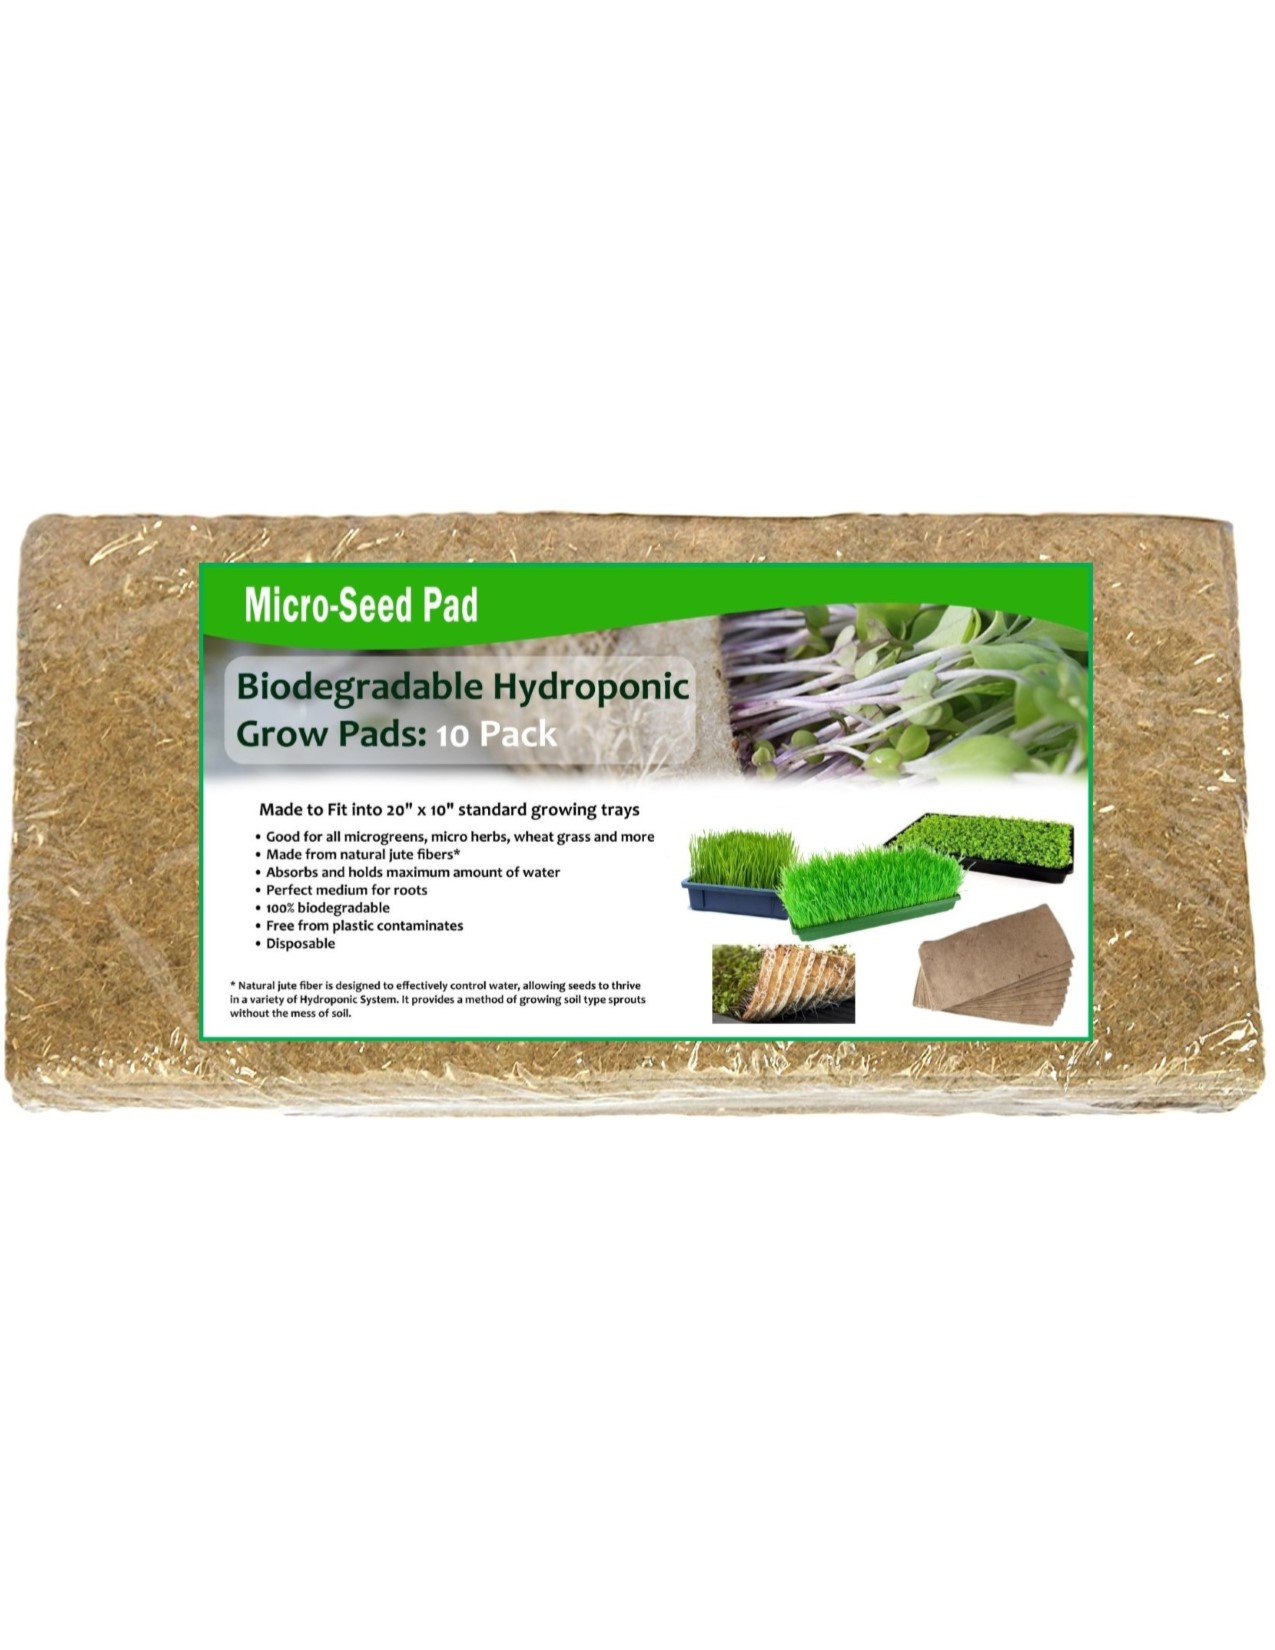 Perfect for MicroGreens 10-Pack Pad Sprouts Organic and Fully Biodegradable Ideal for Hydroponic Growing. Fits Standard 10X20 Germination Tray Wheatgrass Microgreen Jute Grow Mat 